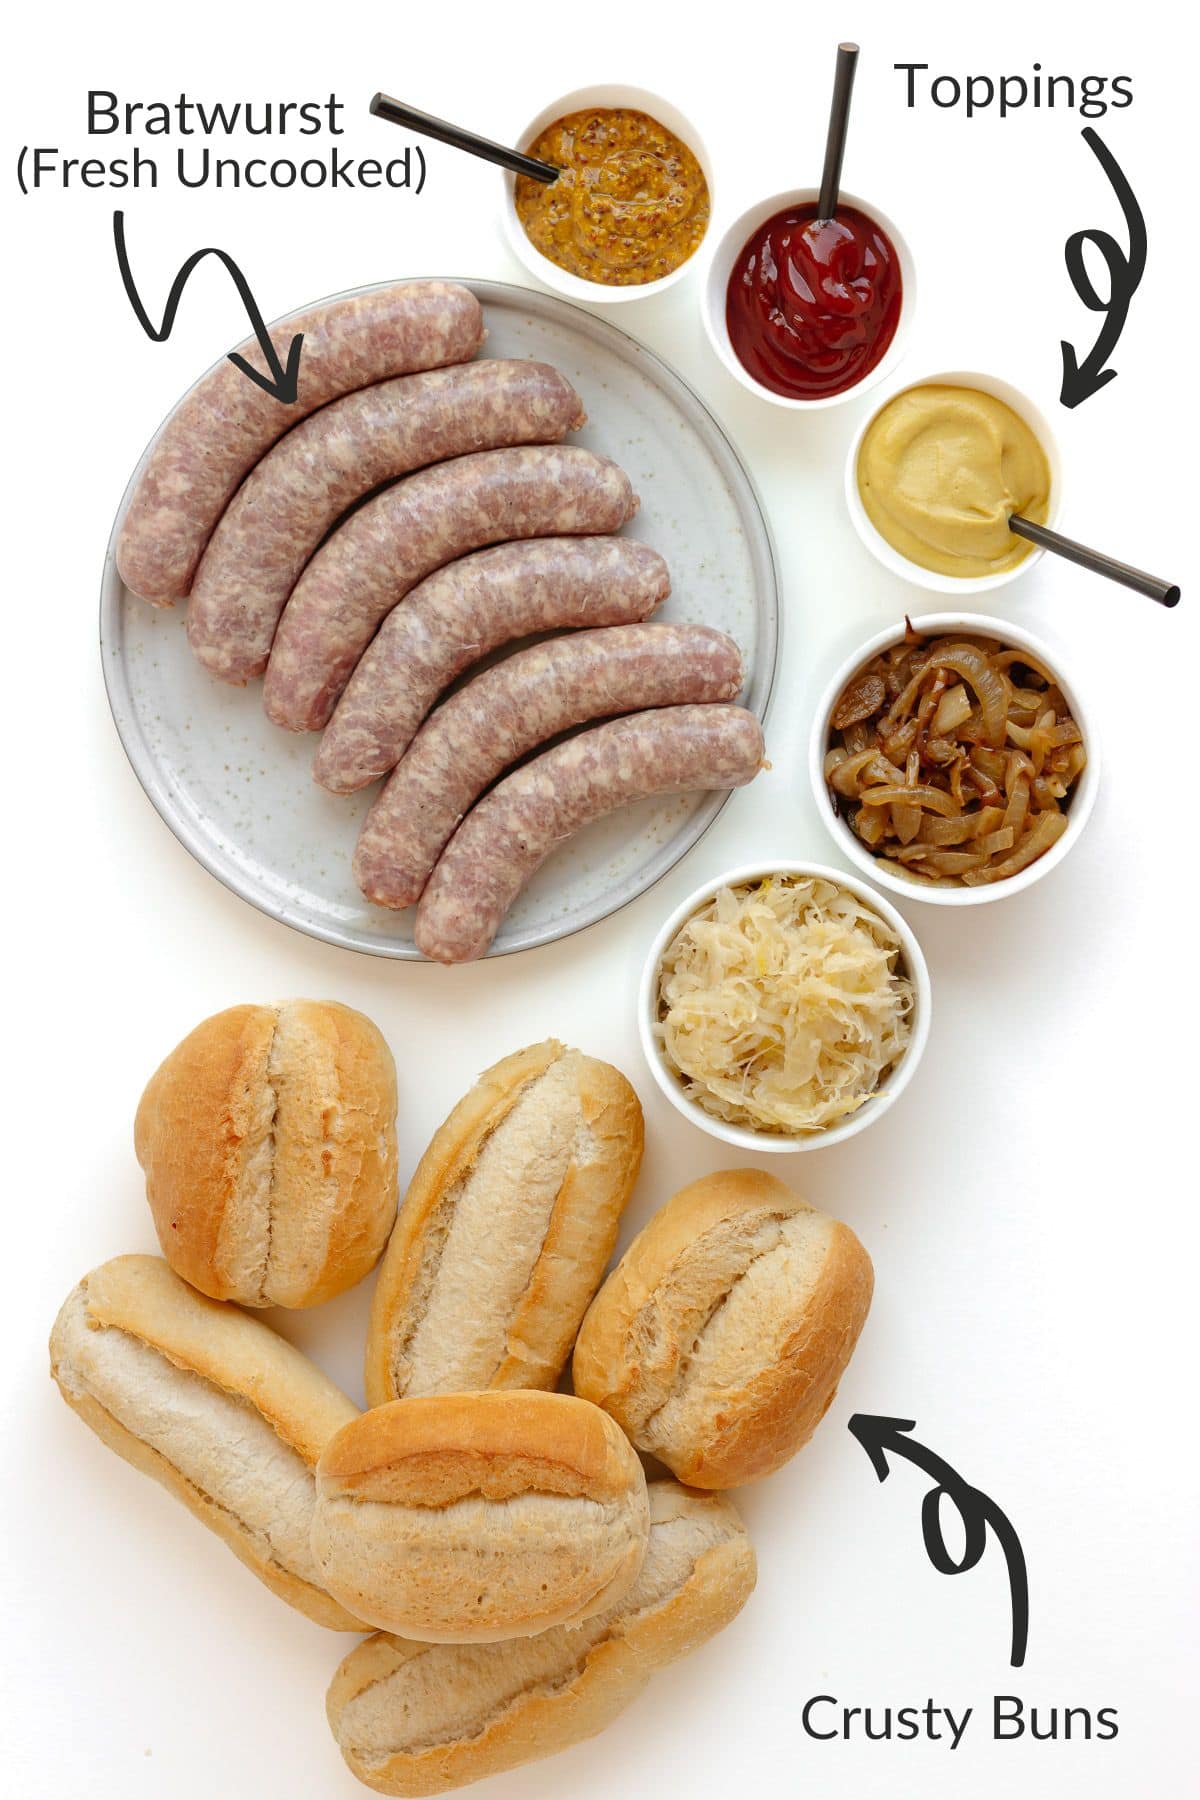 Labelled photo of grilled bratwurst ingredients.